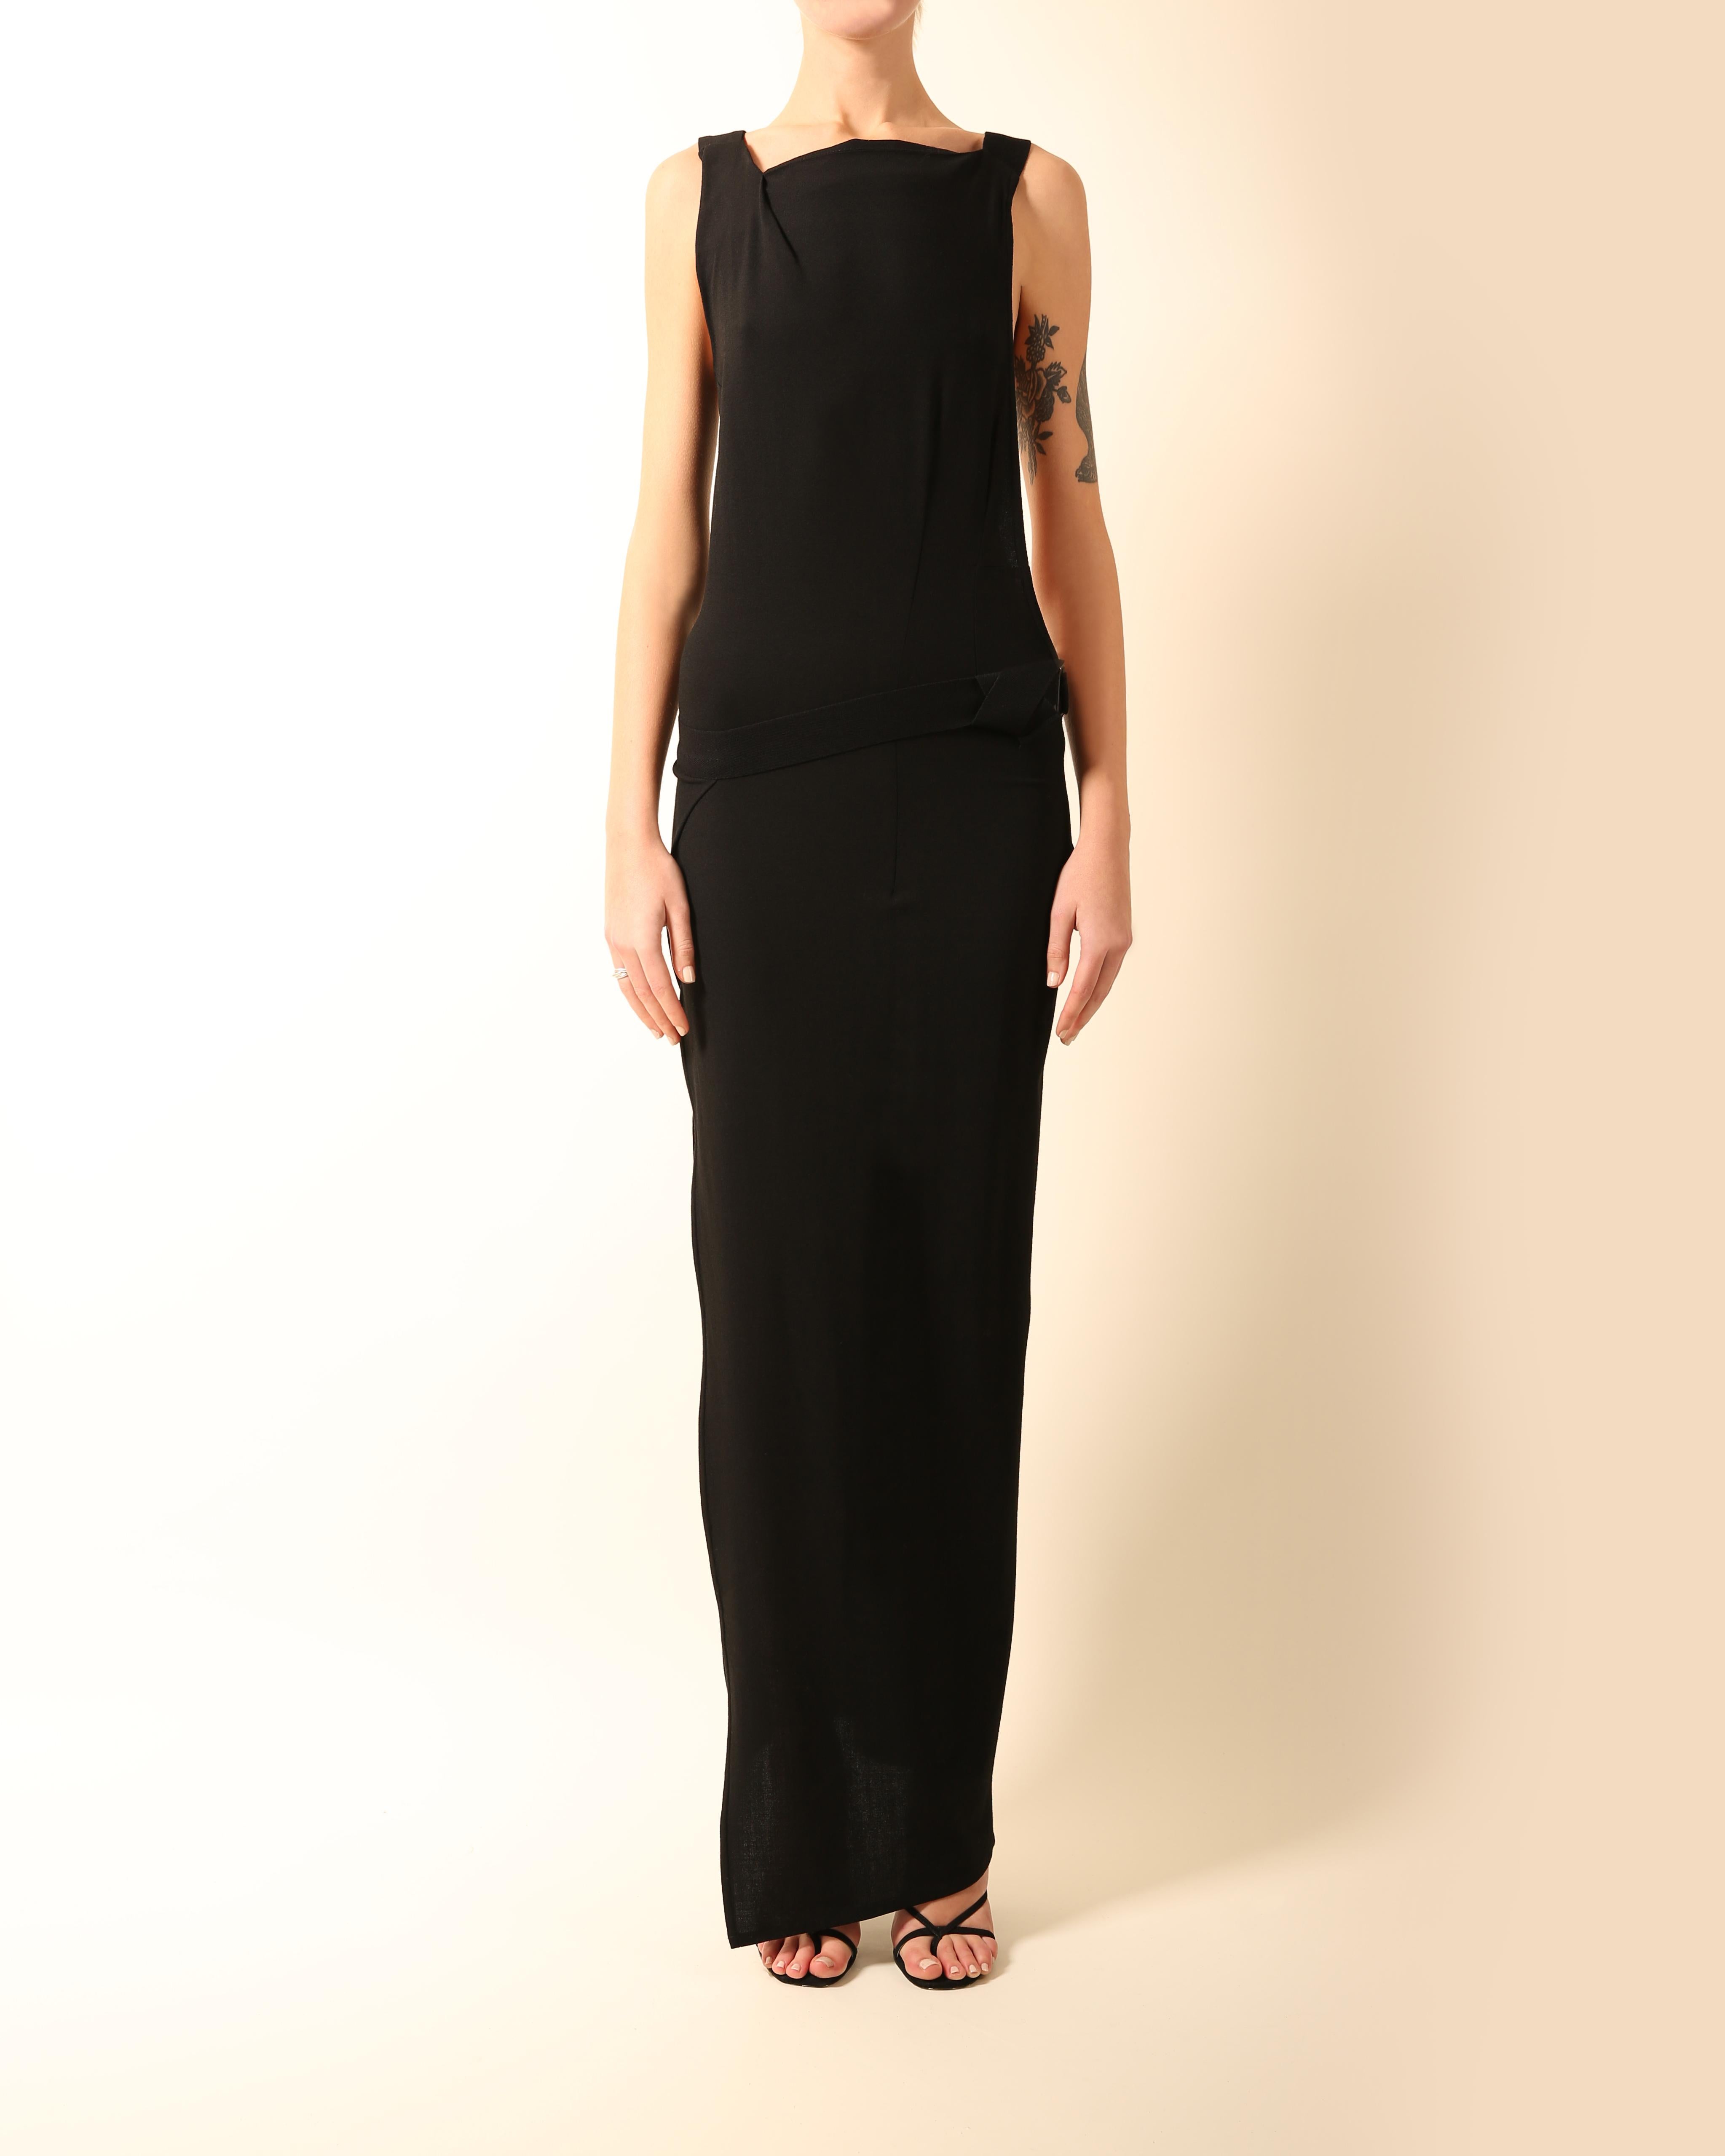 LOVE LALI Vintage

Ann Demeulemeester
Full length black column style dress
Wrap over skirt that fastens via a stretch belt and pull through buckle
Completely backless cut  and sides with a diagonal strap across the back
Stretch fabric
Concealed side